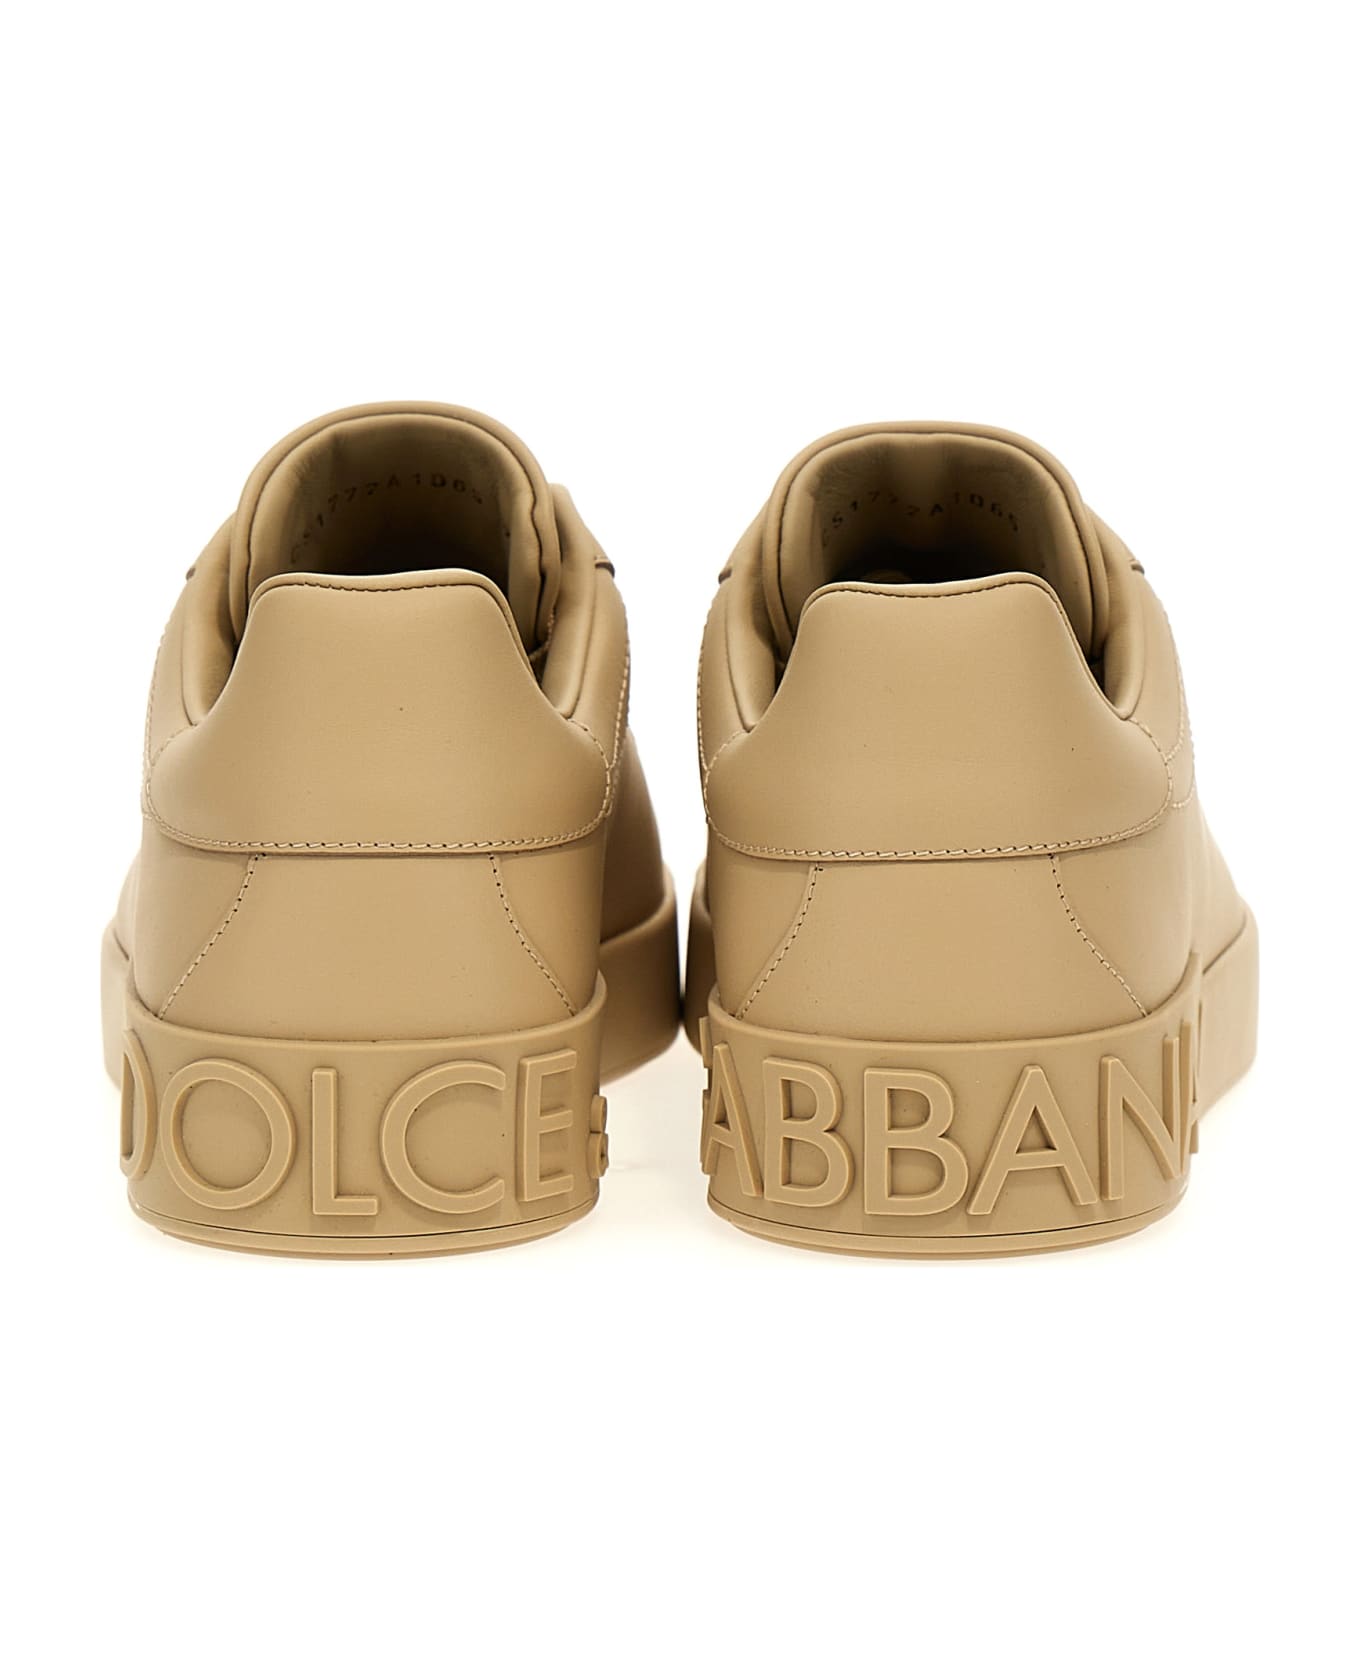 Dolce & Gabbana Portofino Leather Lace-up Sneakers - Beige スニーカー